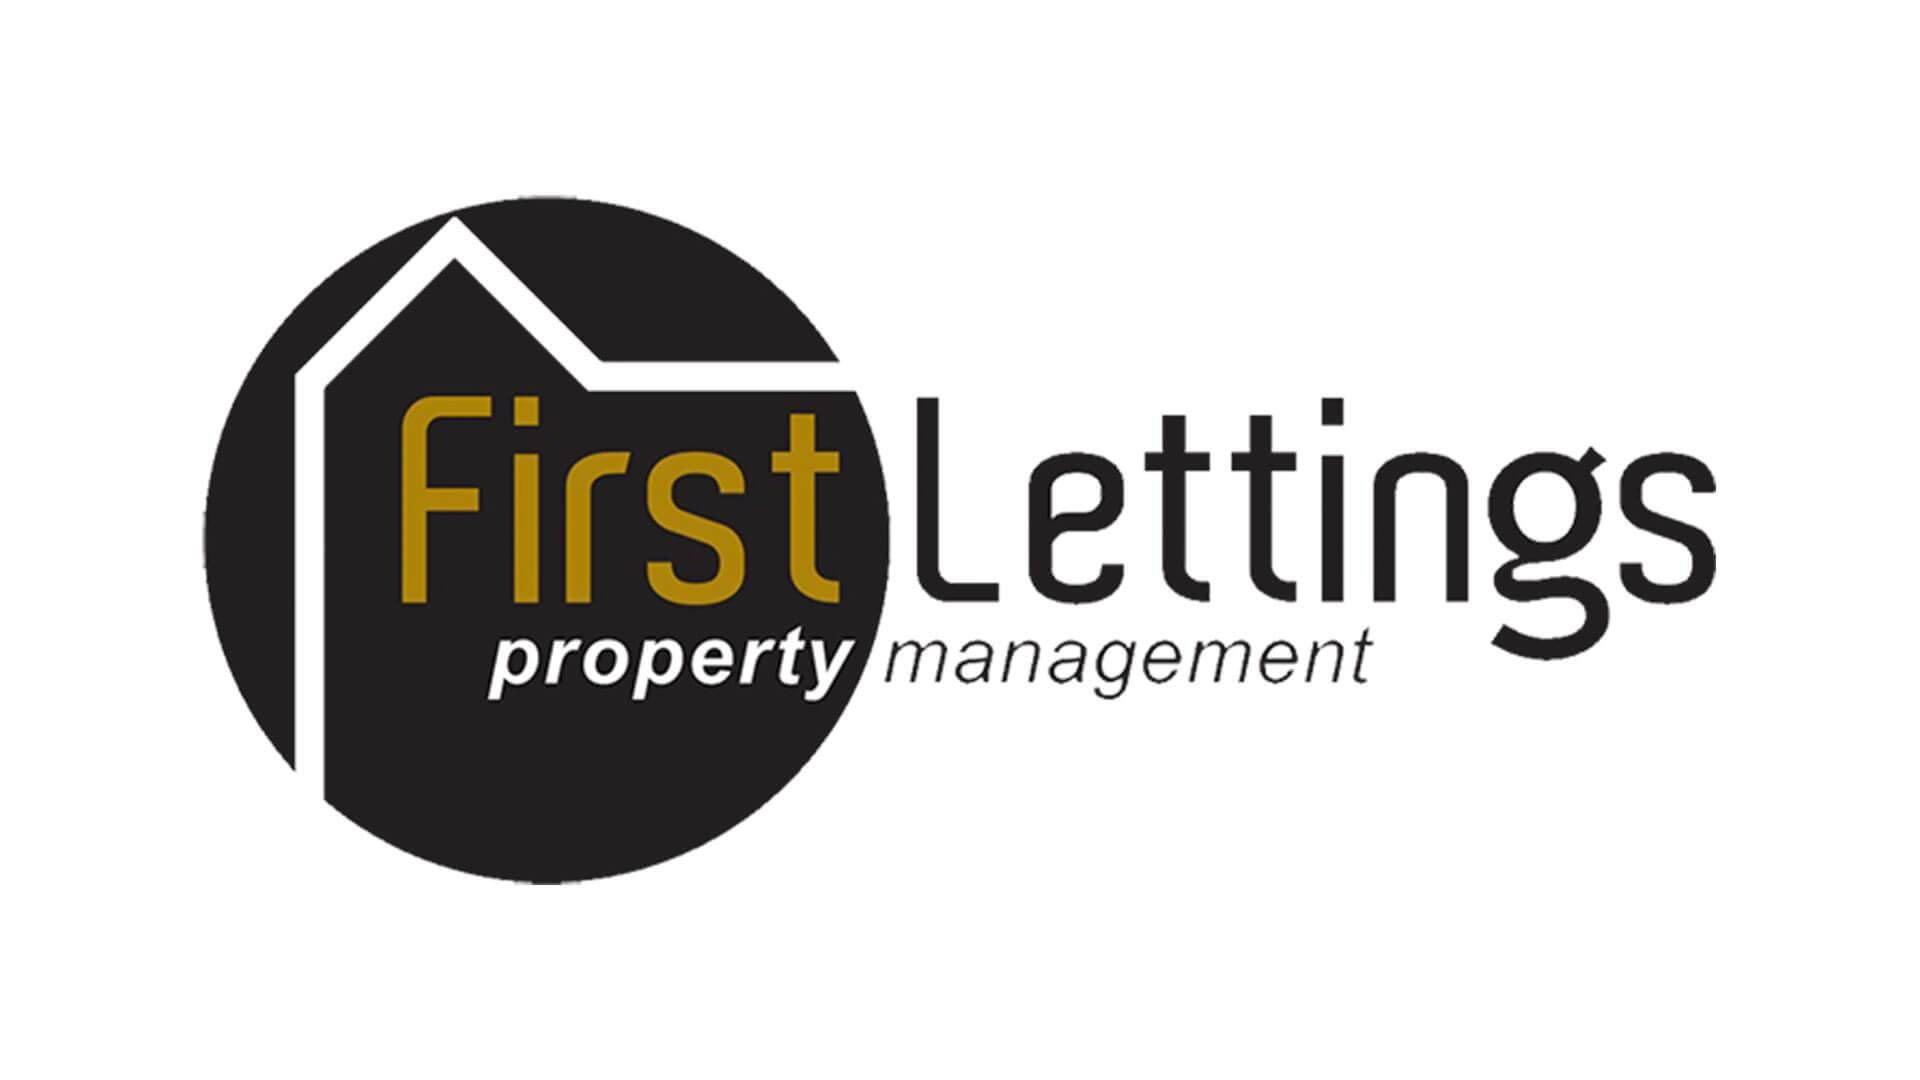 Websters acquires First Lettings Norwich!